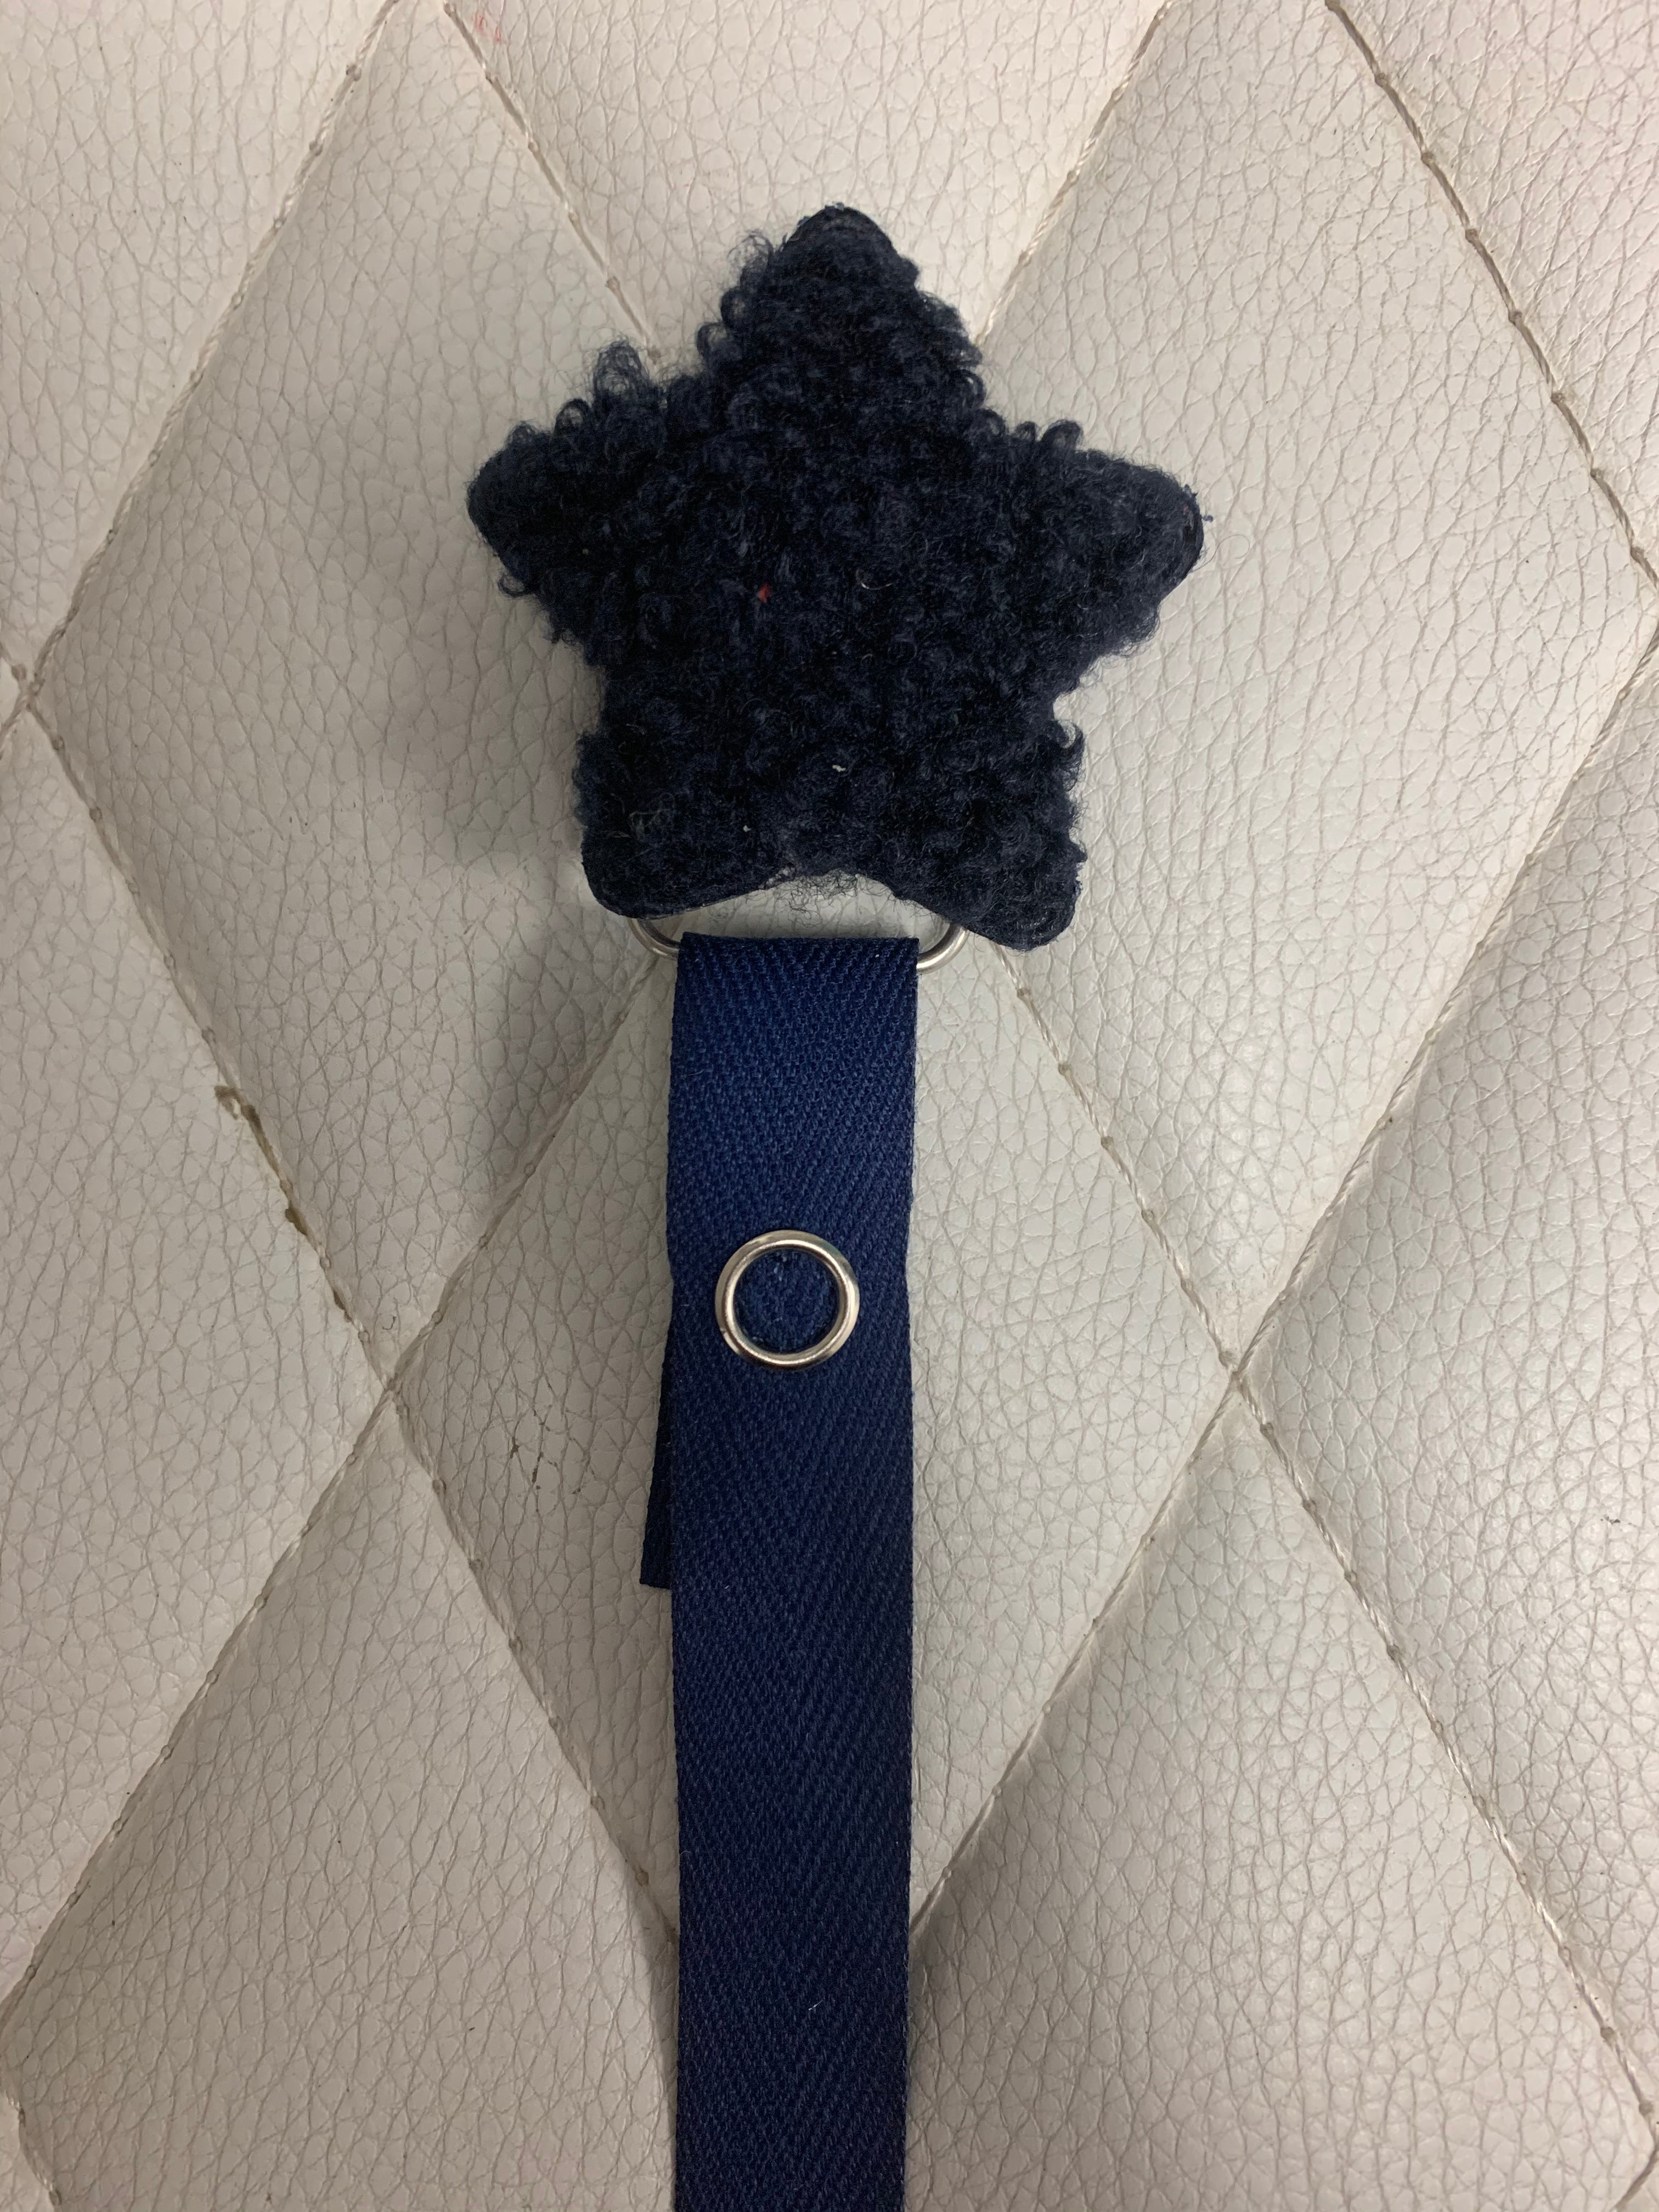 Sherpa Shapes = stars in many colors , grey, off white, navy, cozy pacifier clips